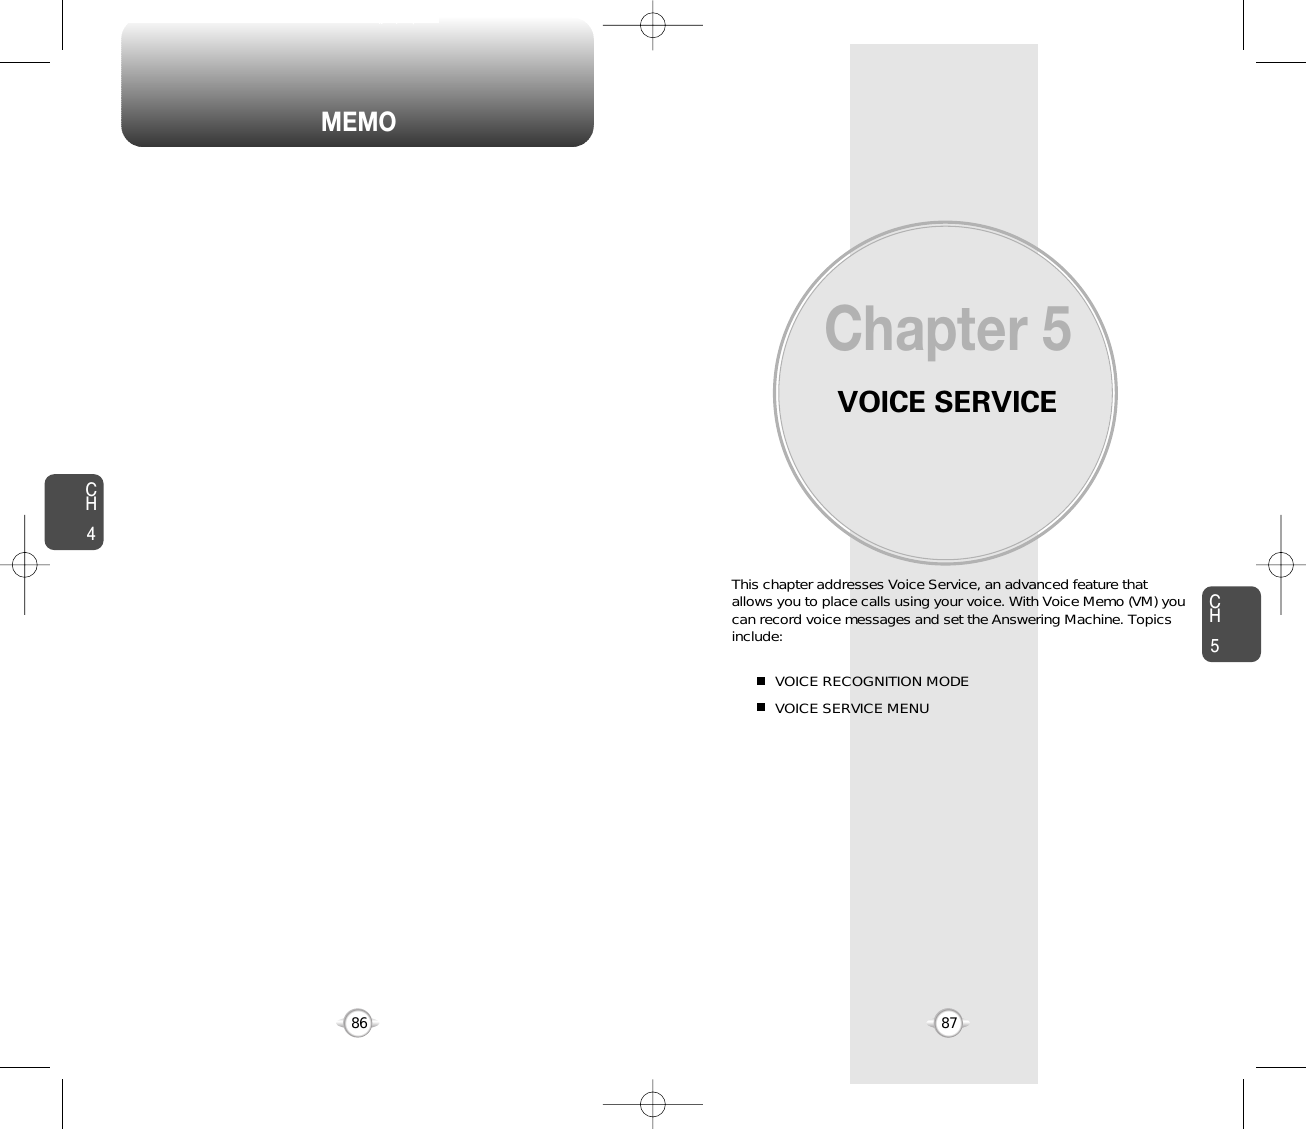 VOICE SERVICEThis chapter addresses Voice Service, an advanced feature thatallows you to place calls using your voice. With Voice Memo (VM) youcan record voice messages and set the Answering Machine. Topicsinclude:VOICE RECOGNITION MODEVOICE SERVICE MENU Chapter 58786CH587MEMOCH4